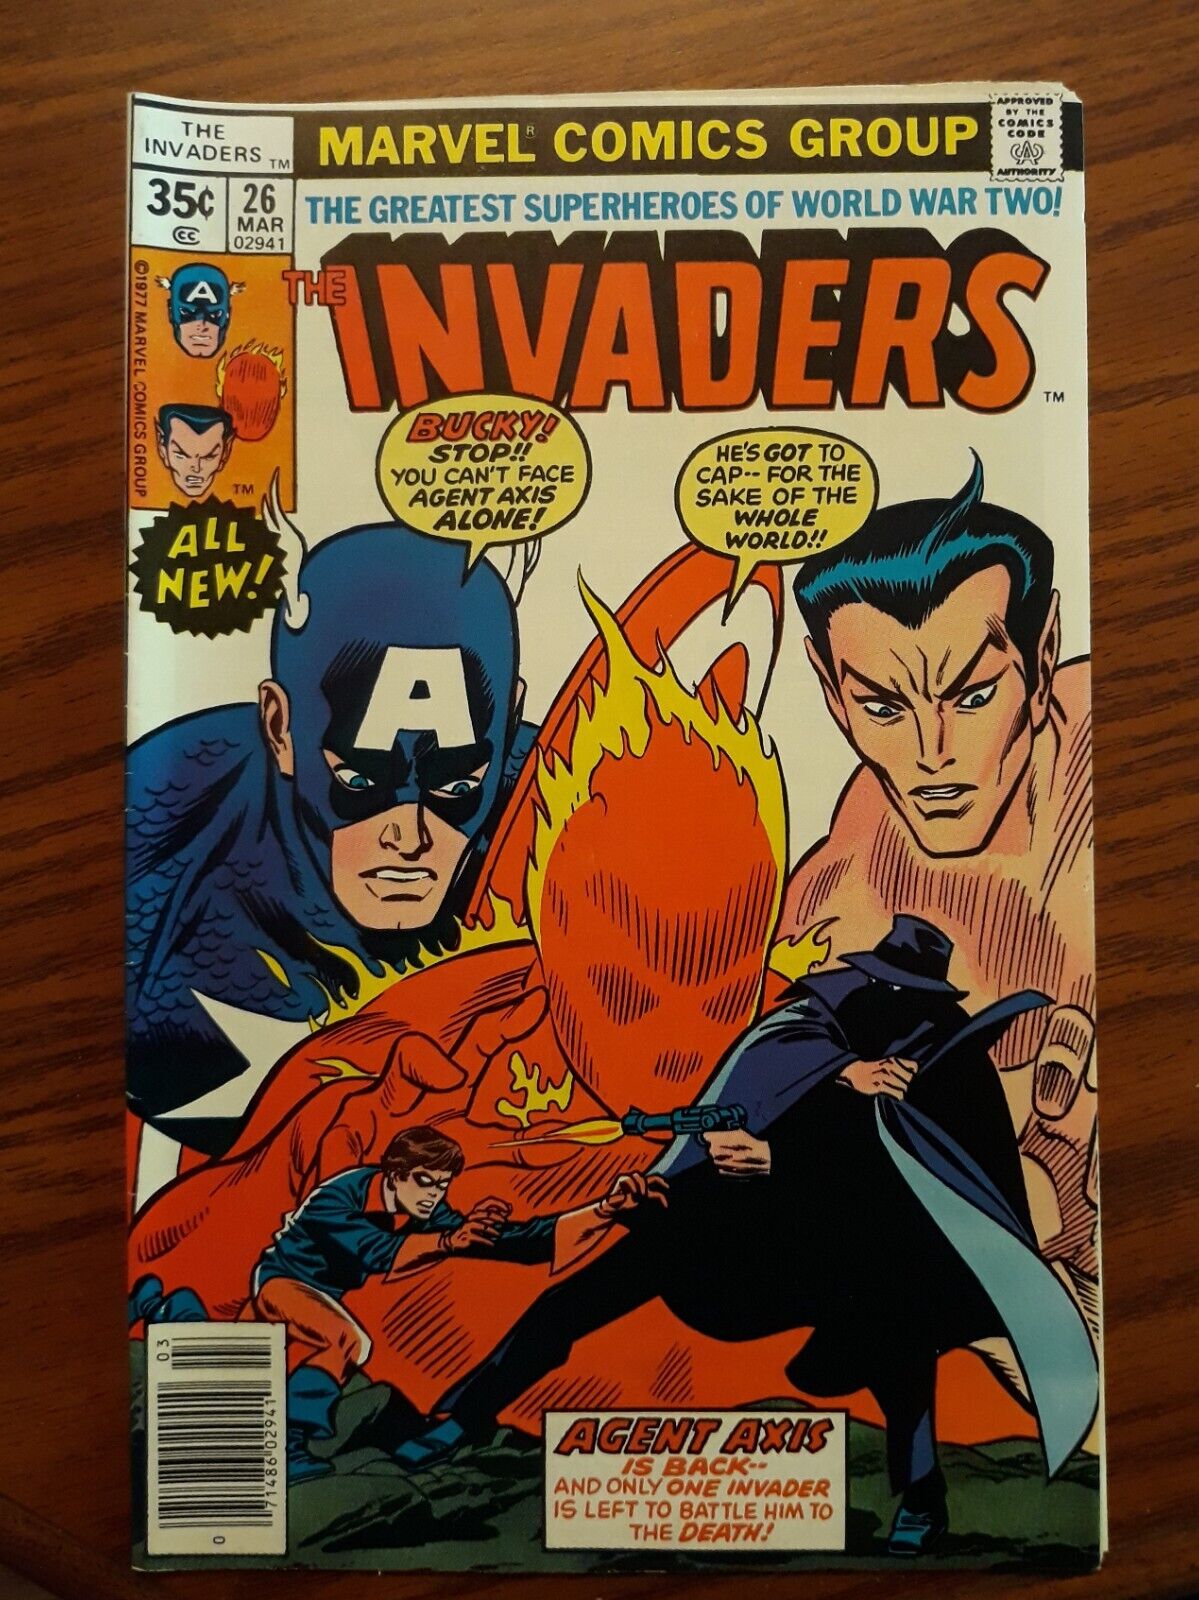 The Invaders #18 (July 1977, Marvel Comics) The GREATEST SUPERHEROES OF WORLD II